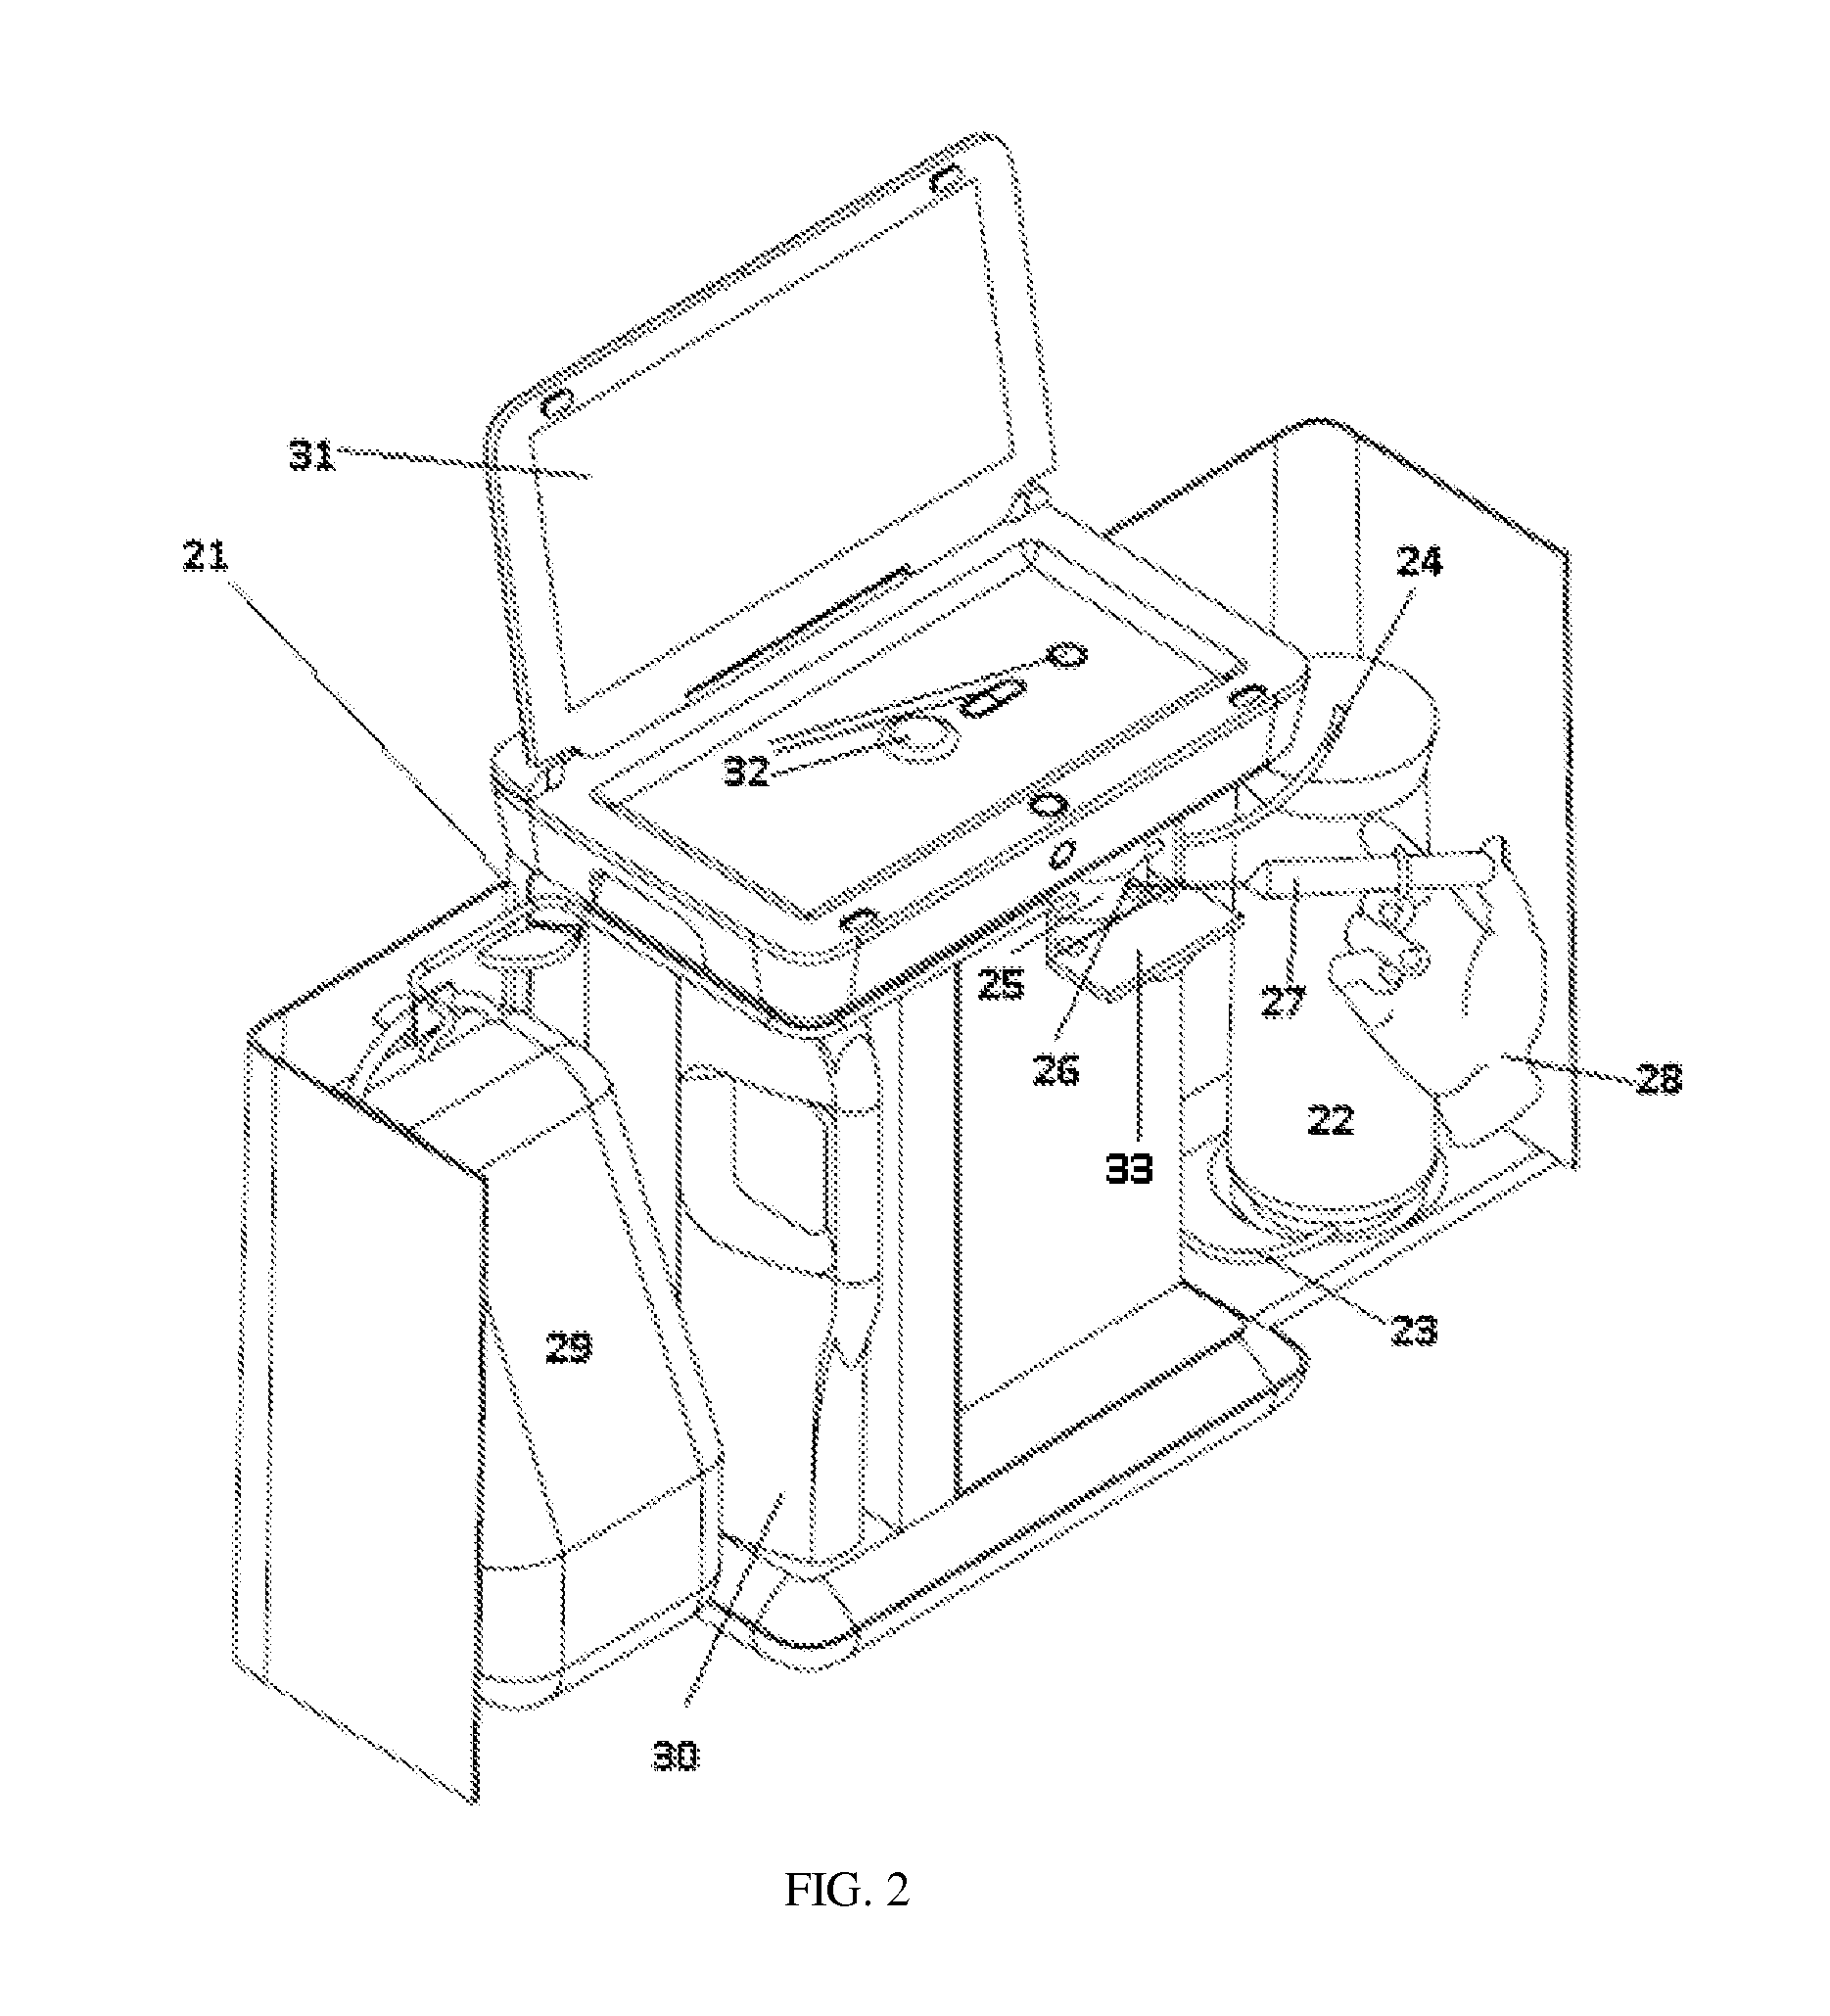 Urease introduction system for replenishing urease in a sorbent cartridge